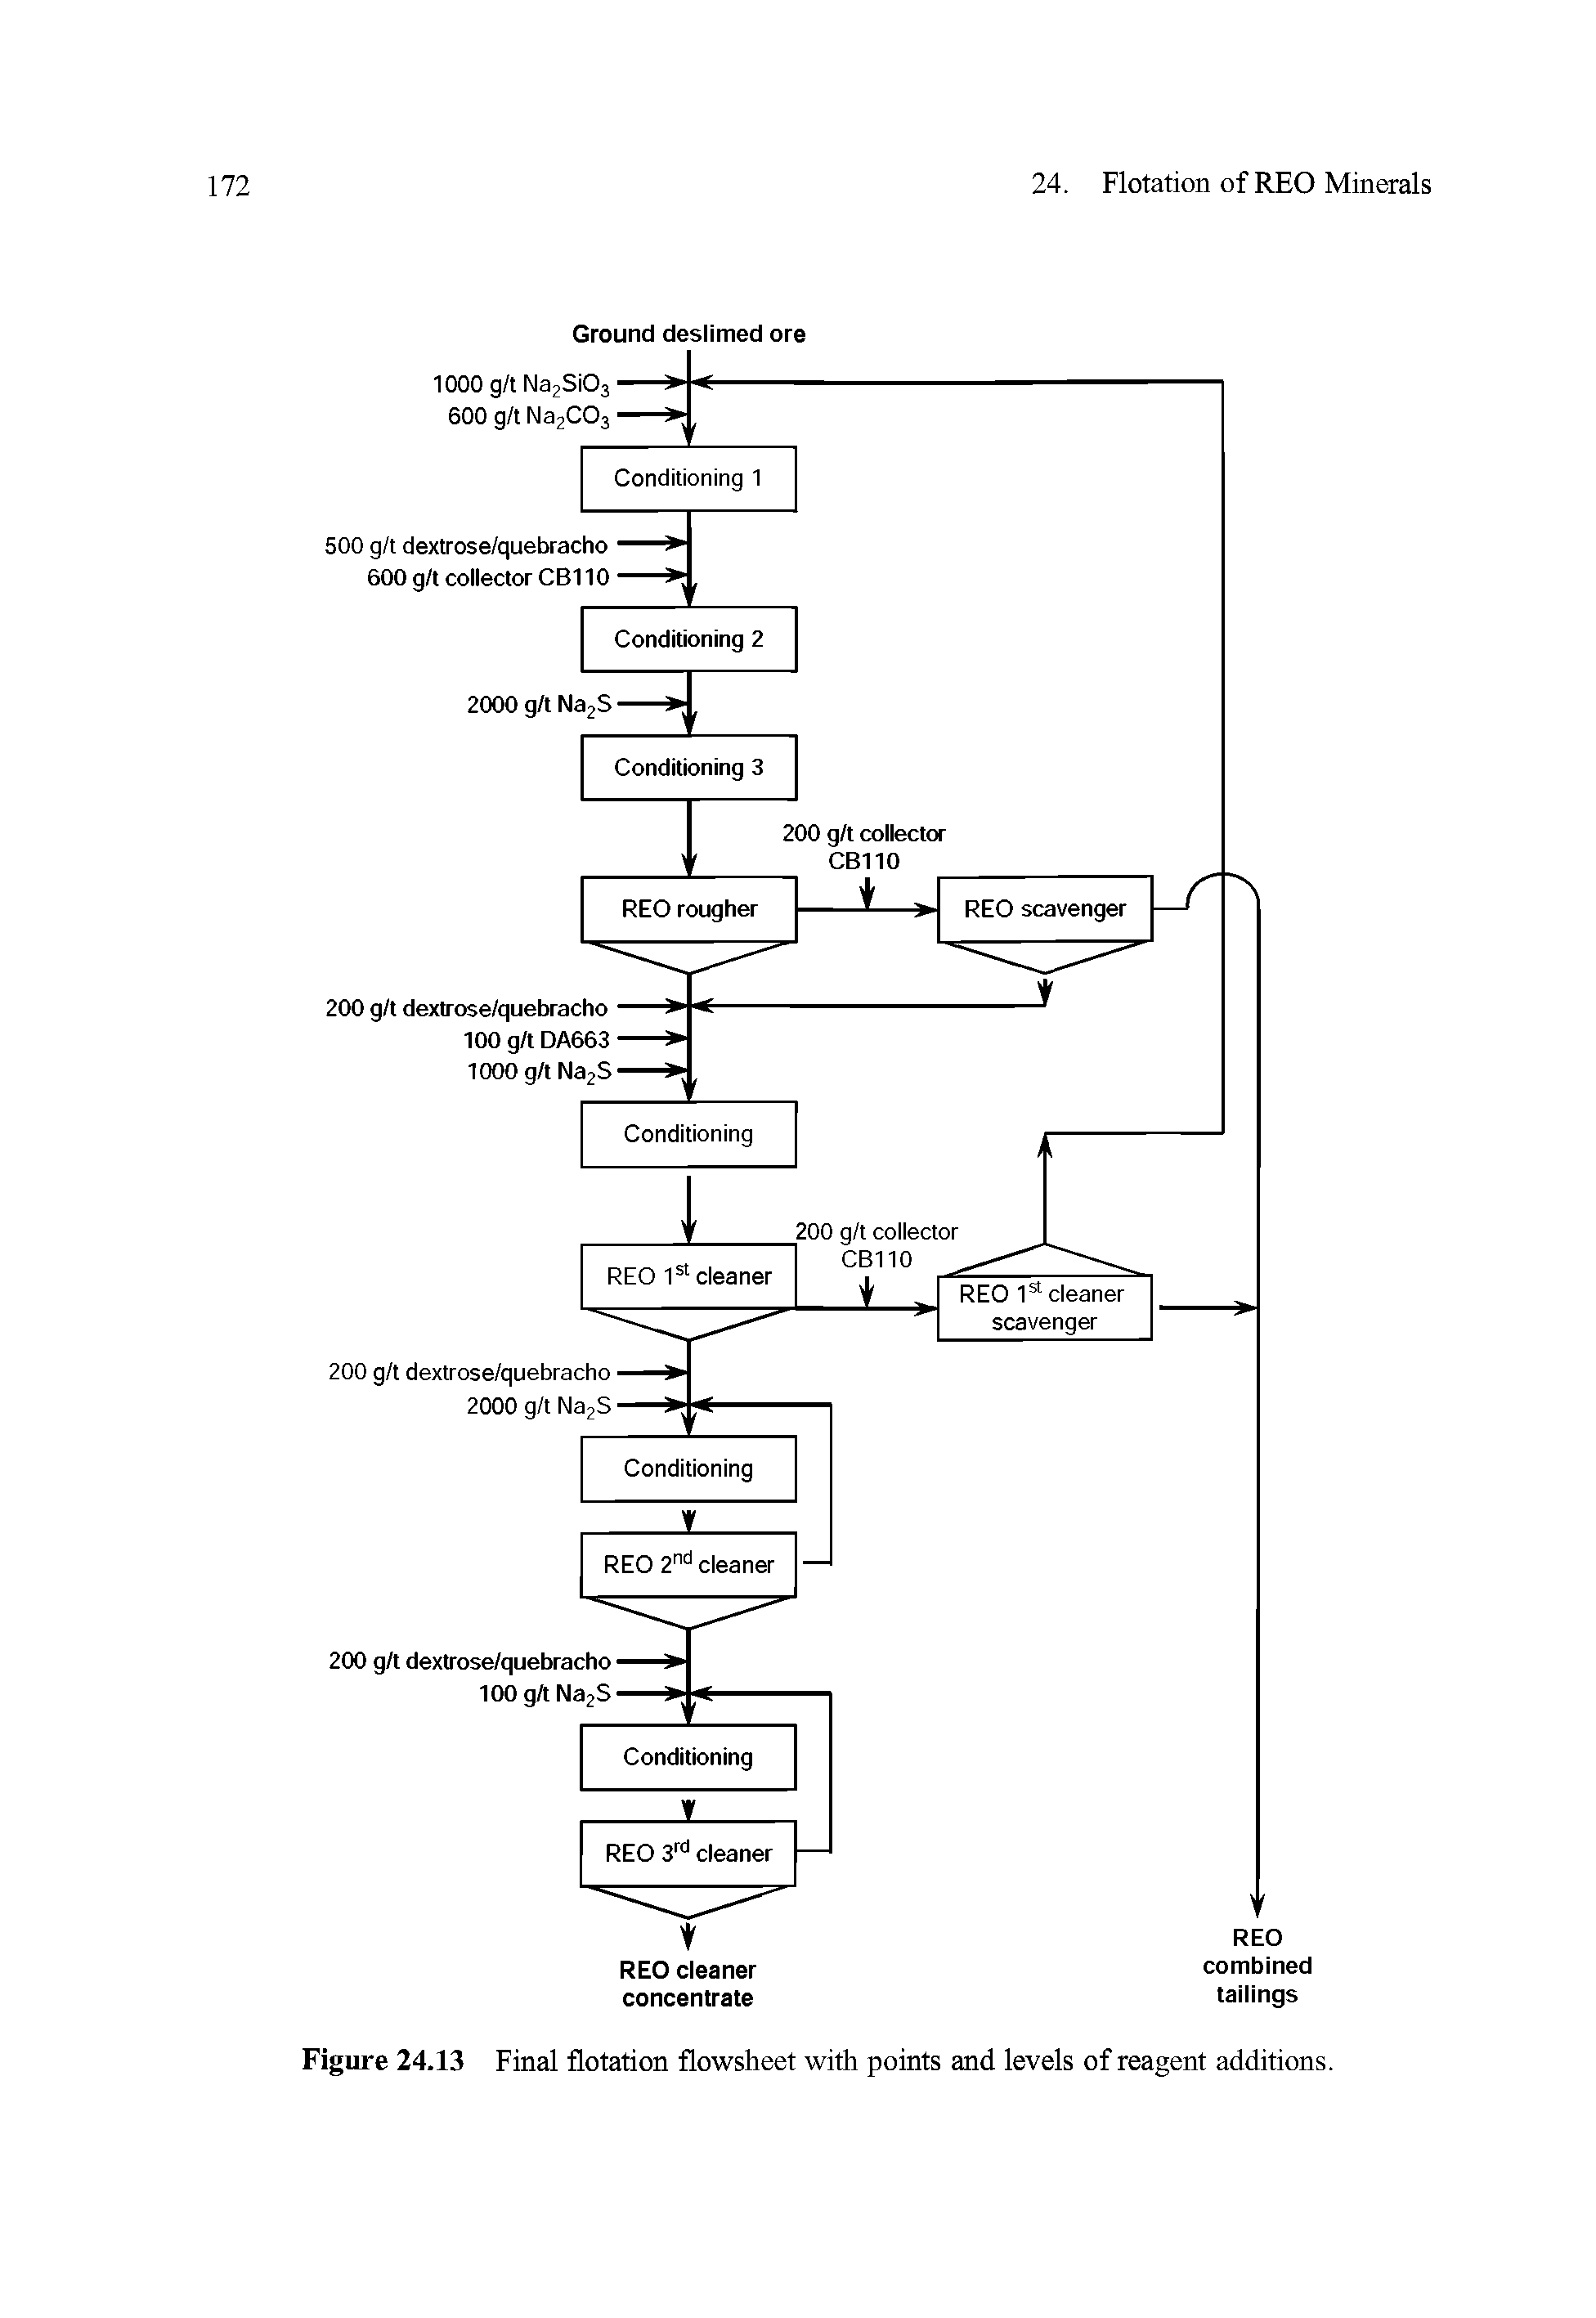 Figure 24.13 Final flotation flowsheet with points and levels of reagent additions.